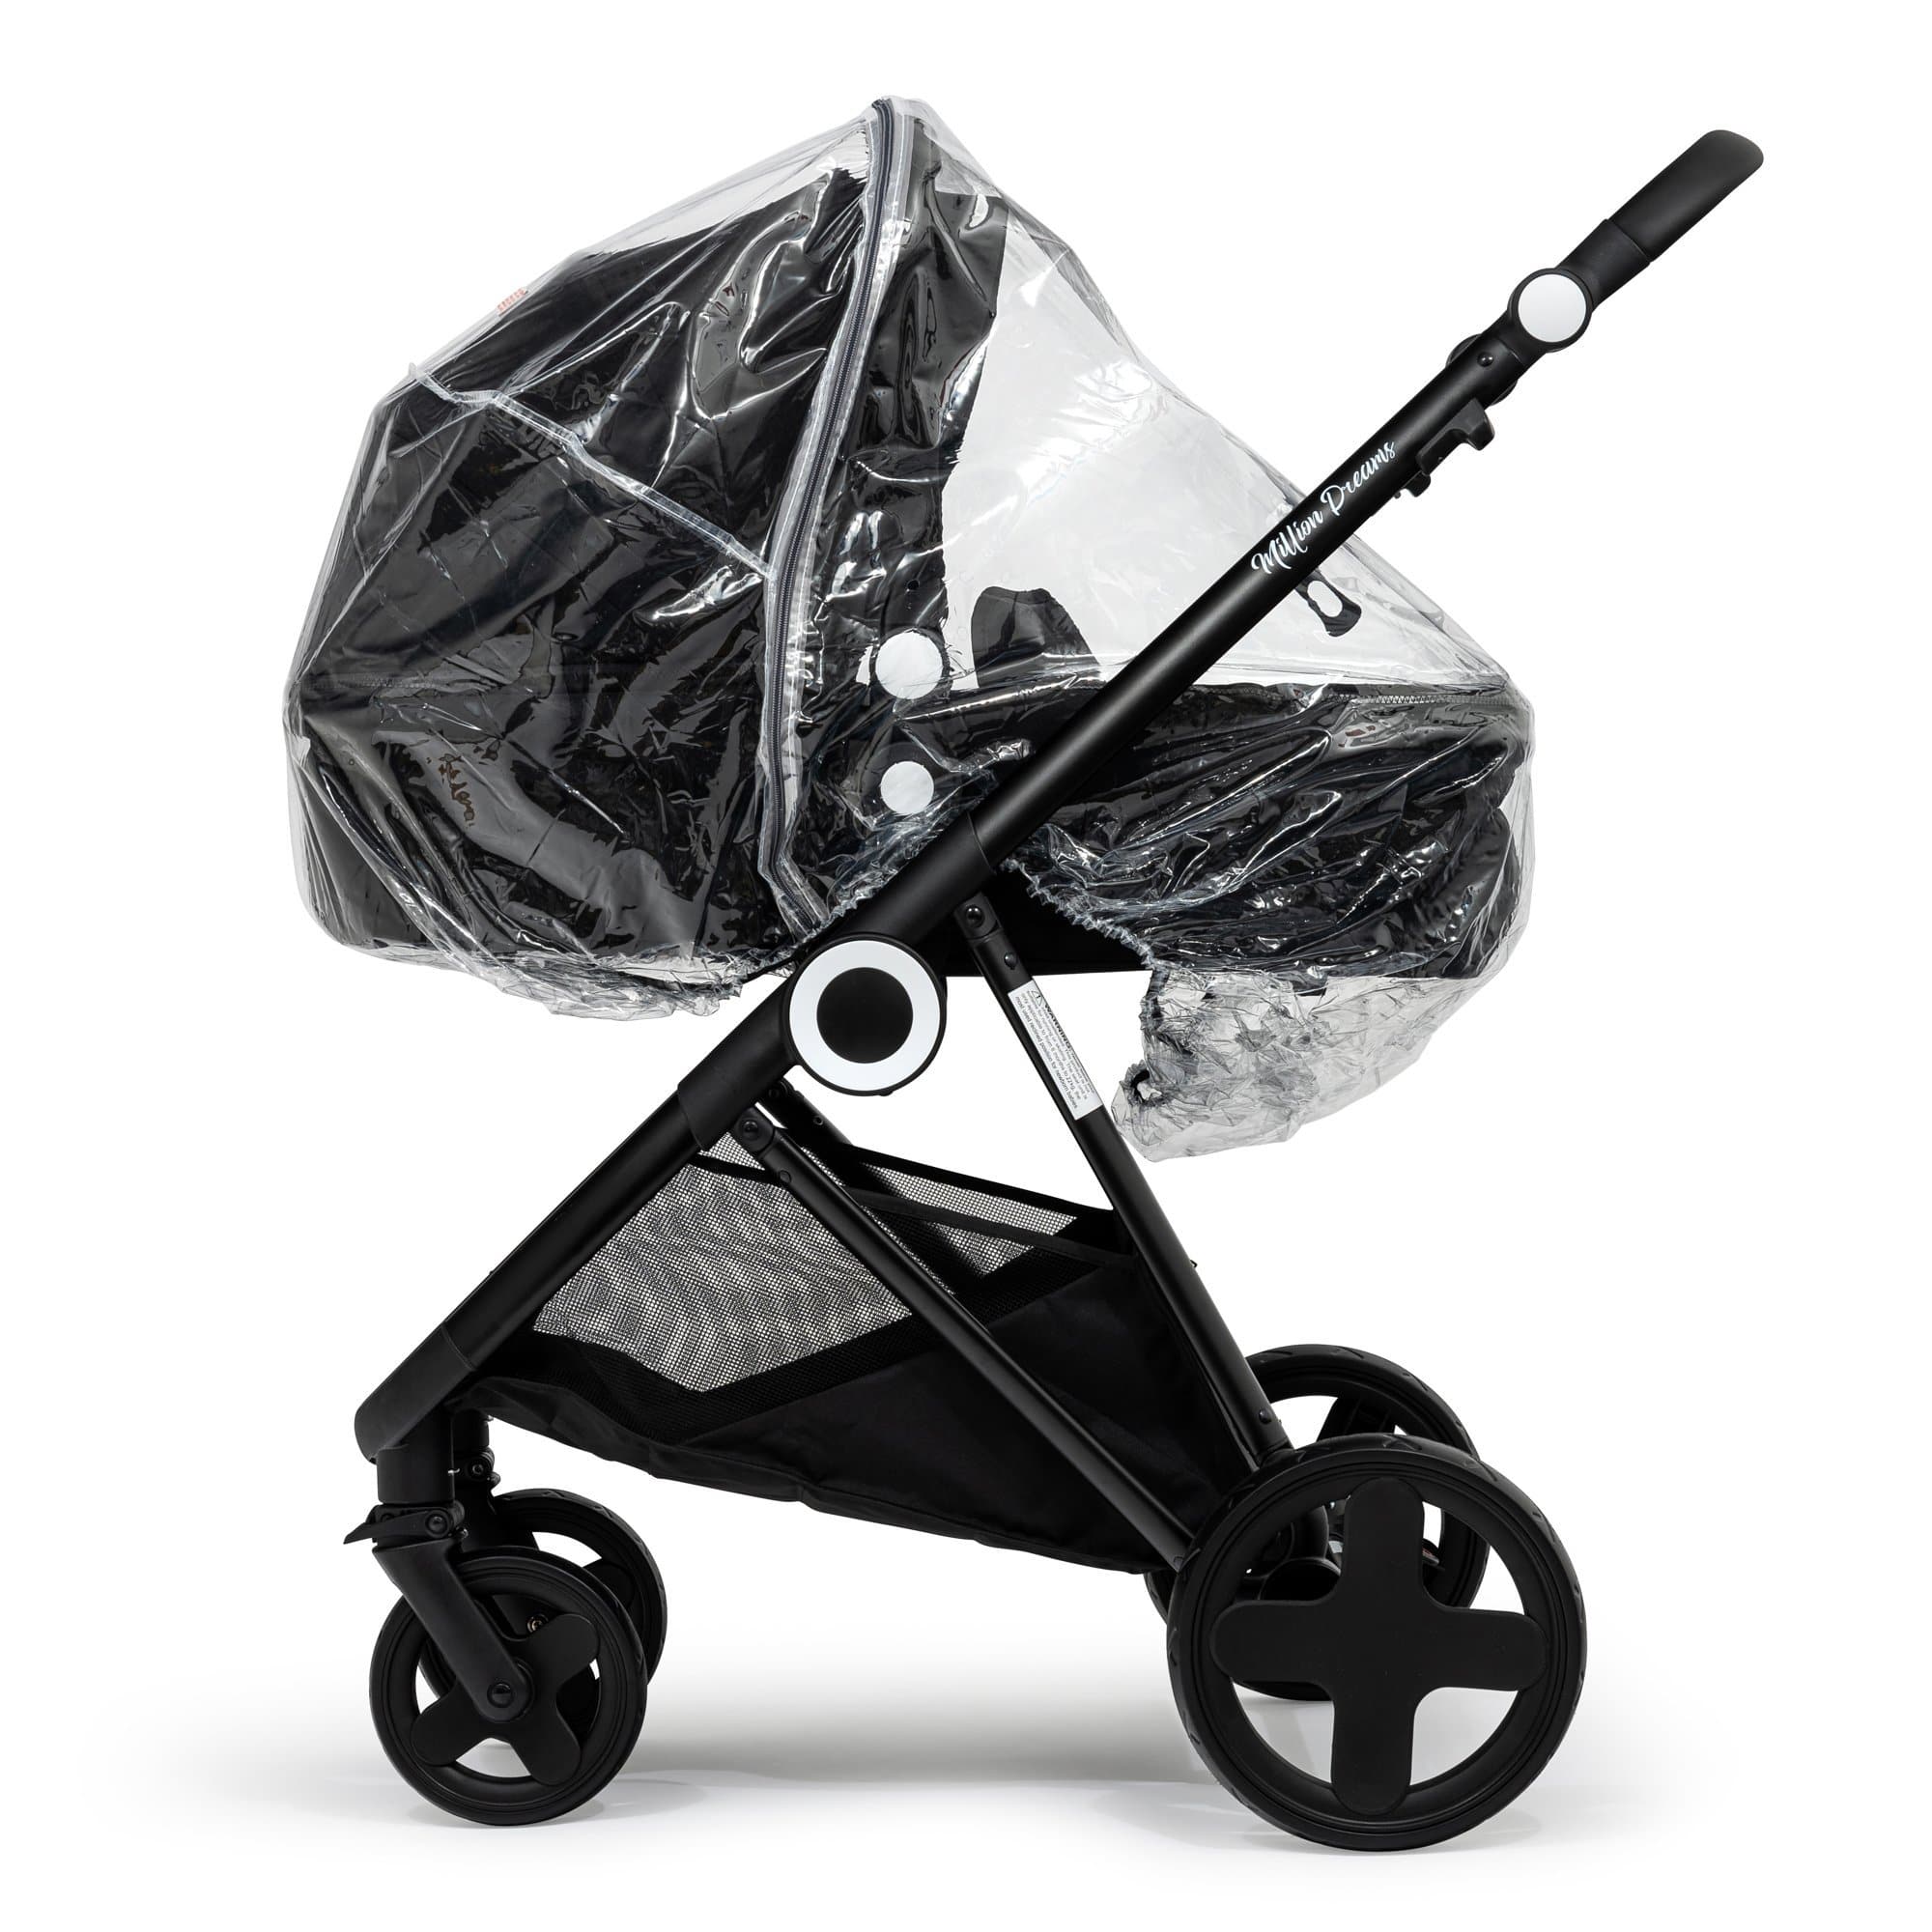 2 in 1 Rain Cover Compatible with Looping - Fits All Models - For Your Little One